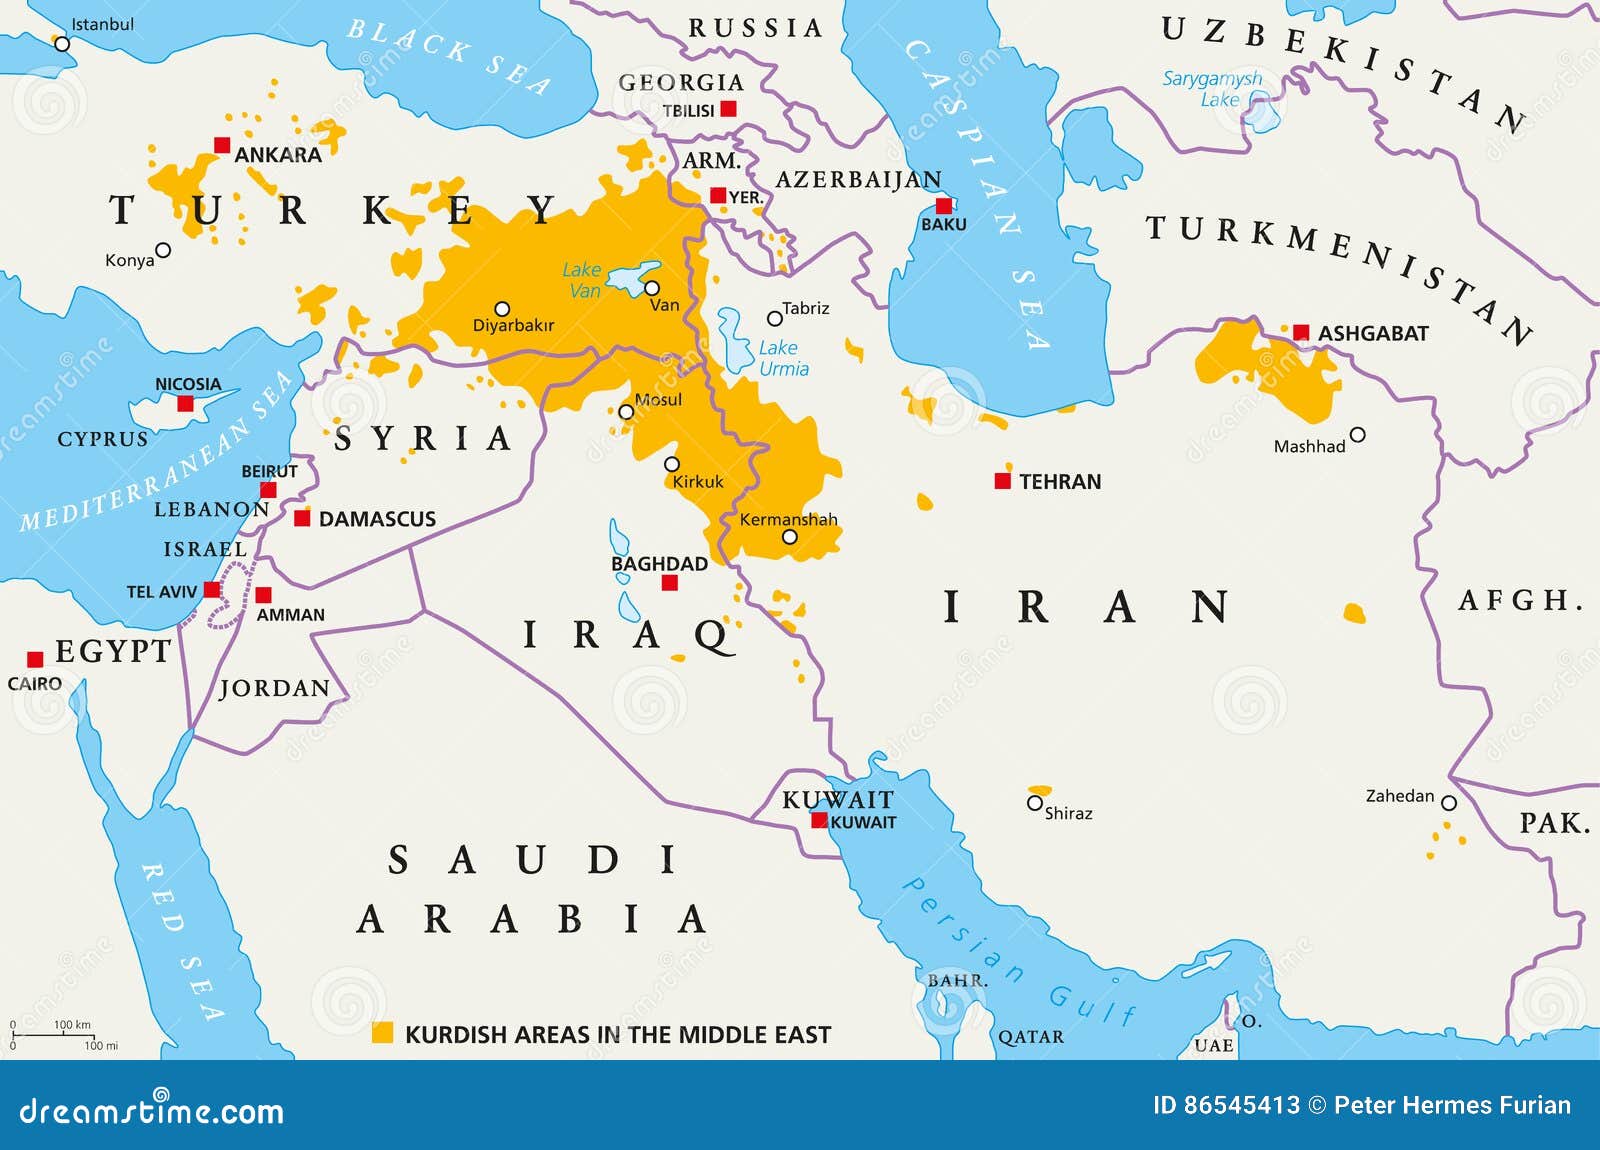 kurdish areas in the middle east, political map